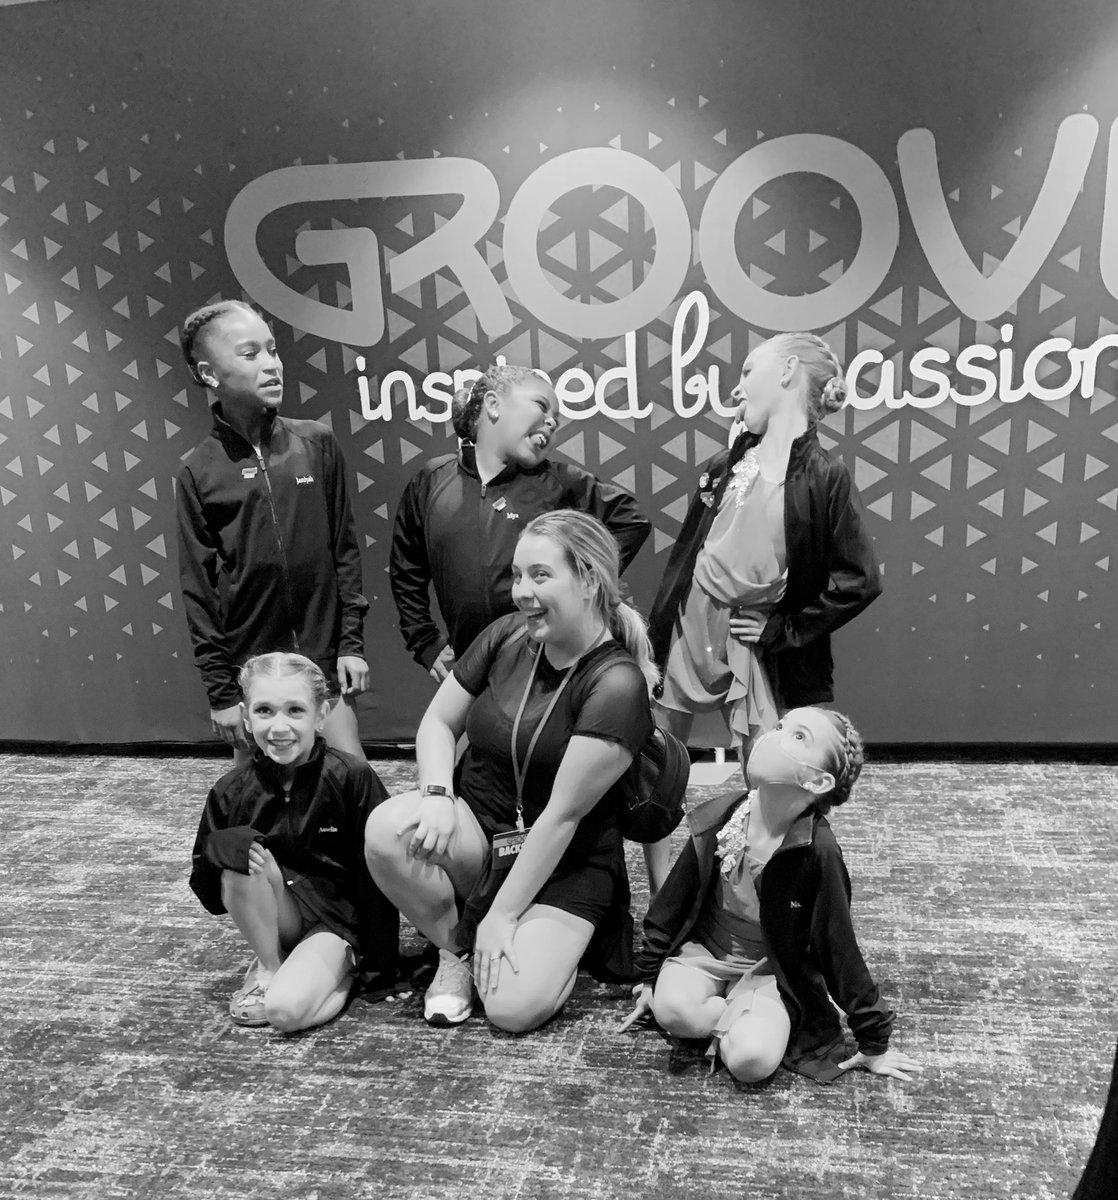 Second Competition of the season!!! So proud of them, specially morena bella #GrooveFtLauderdale #minielitelyricalteam2022
#balletelite #firstplacewinners https://t.co/UkzWtgqPZ5